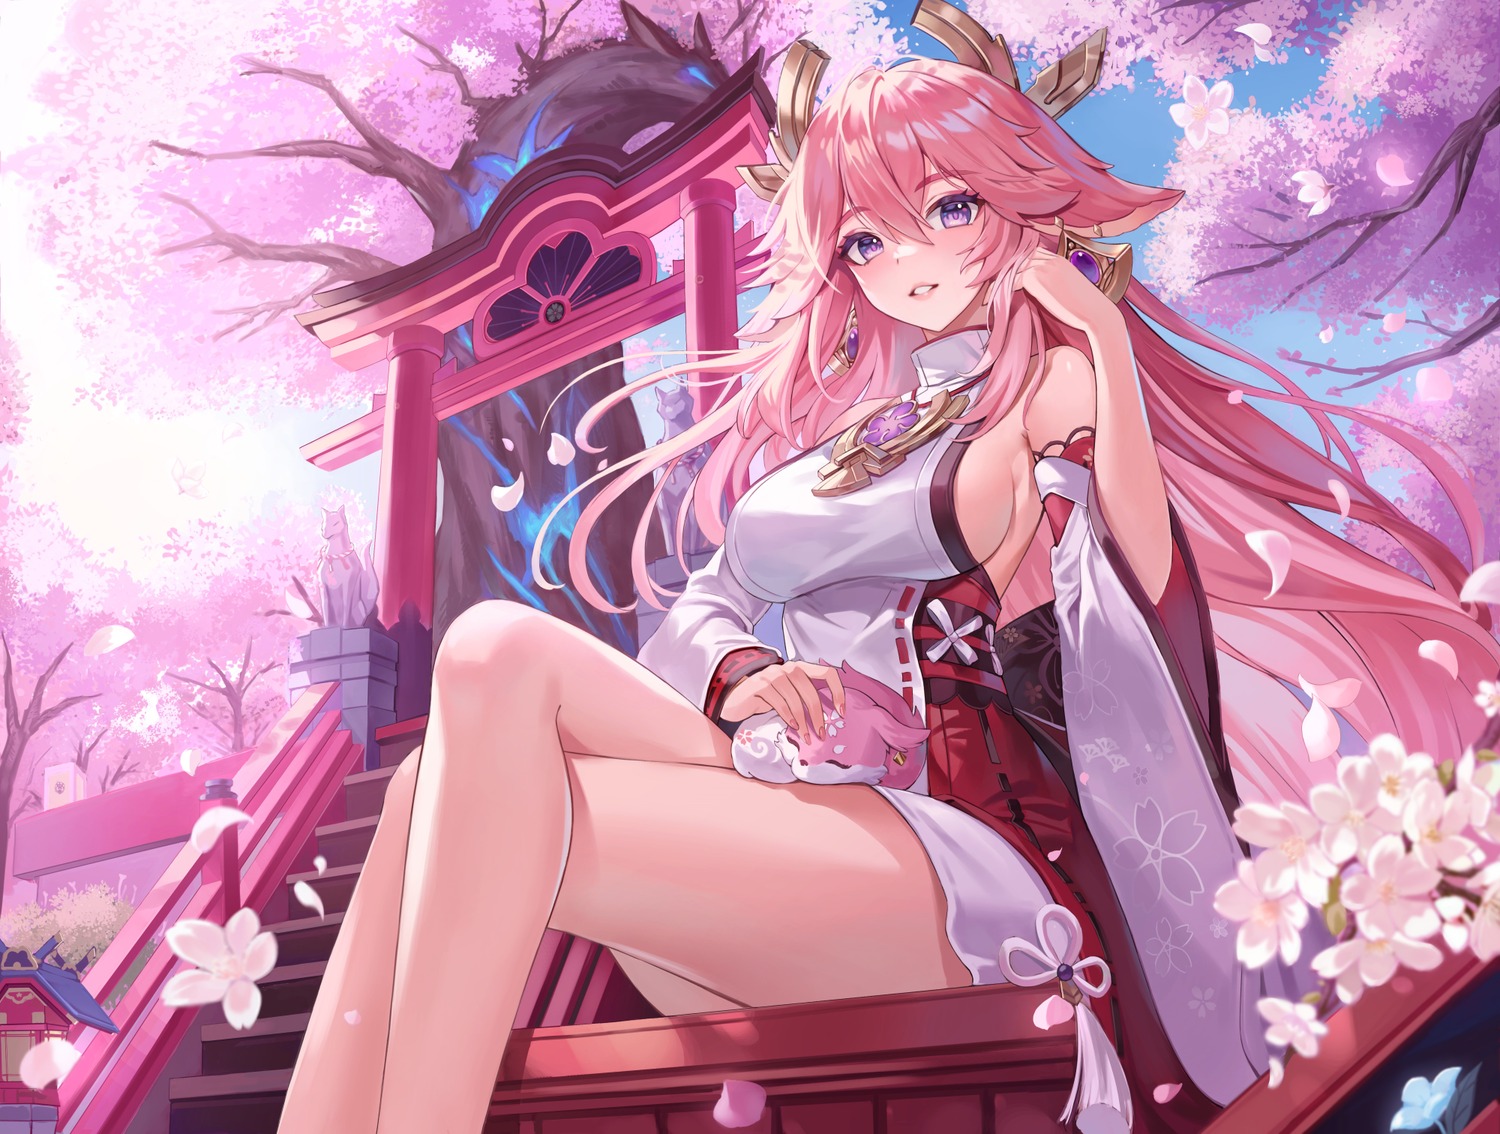 Yae Miko Gifts Guide for fans